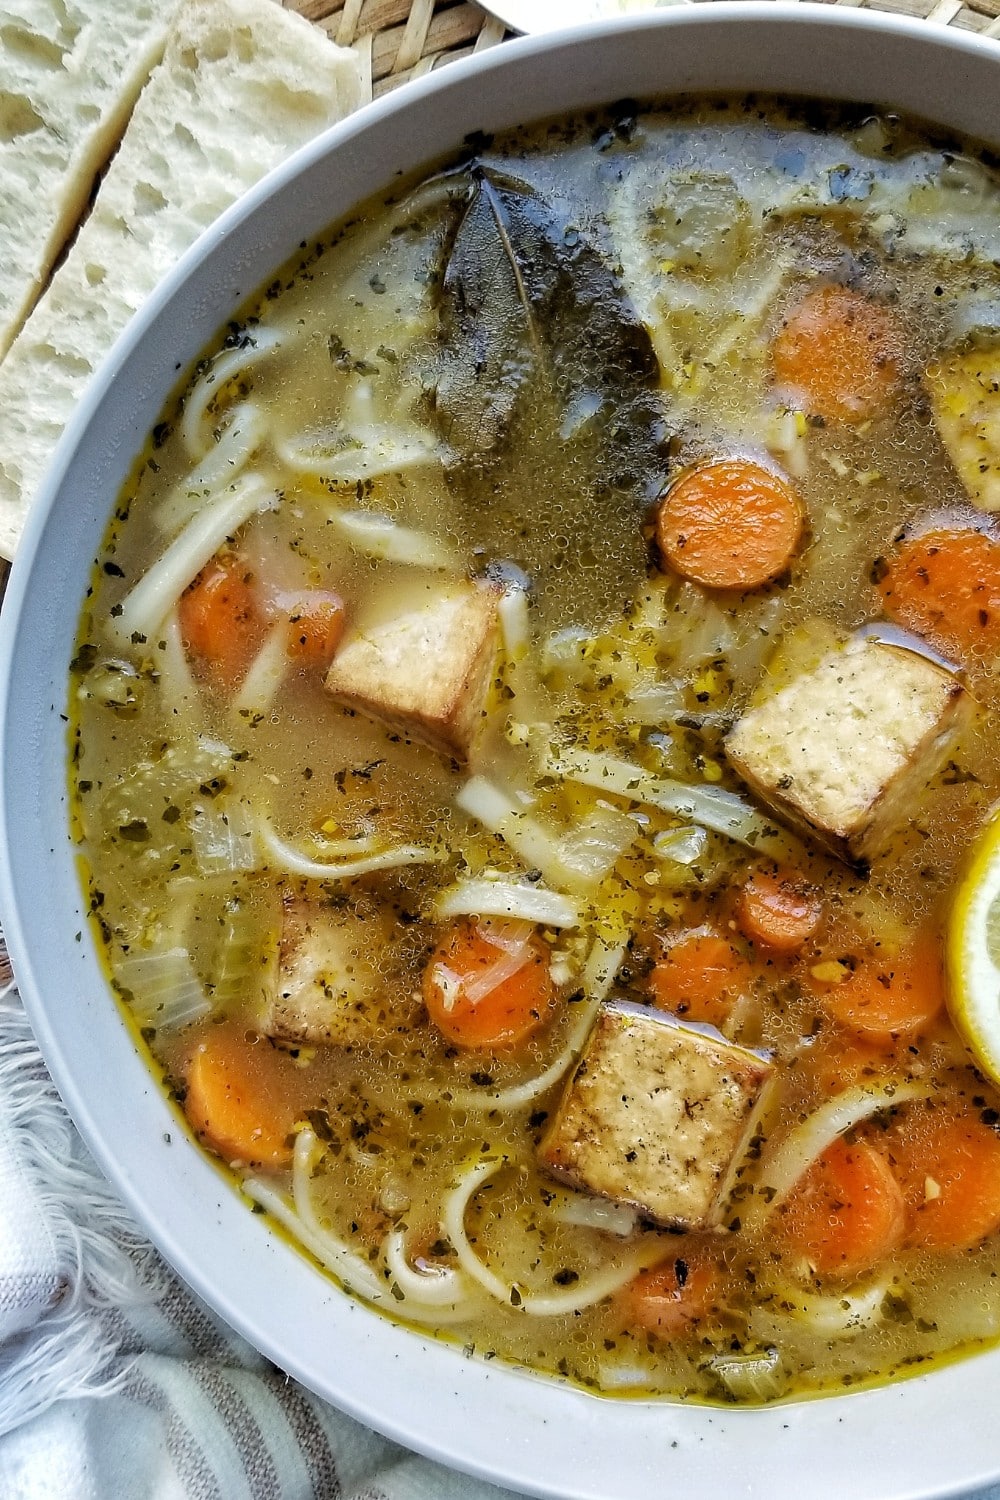 A bowl of chicken noodle soup with carrots and tofu.